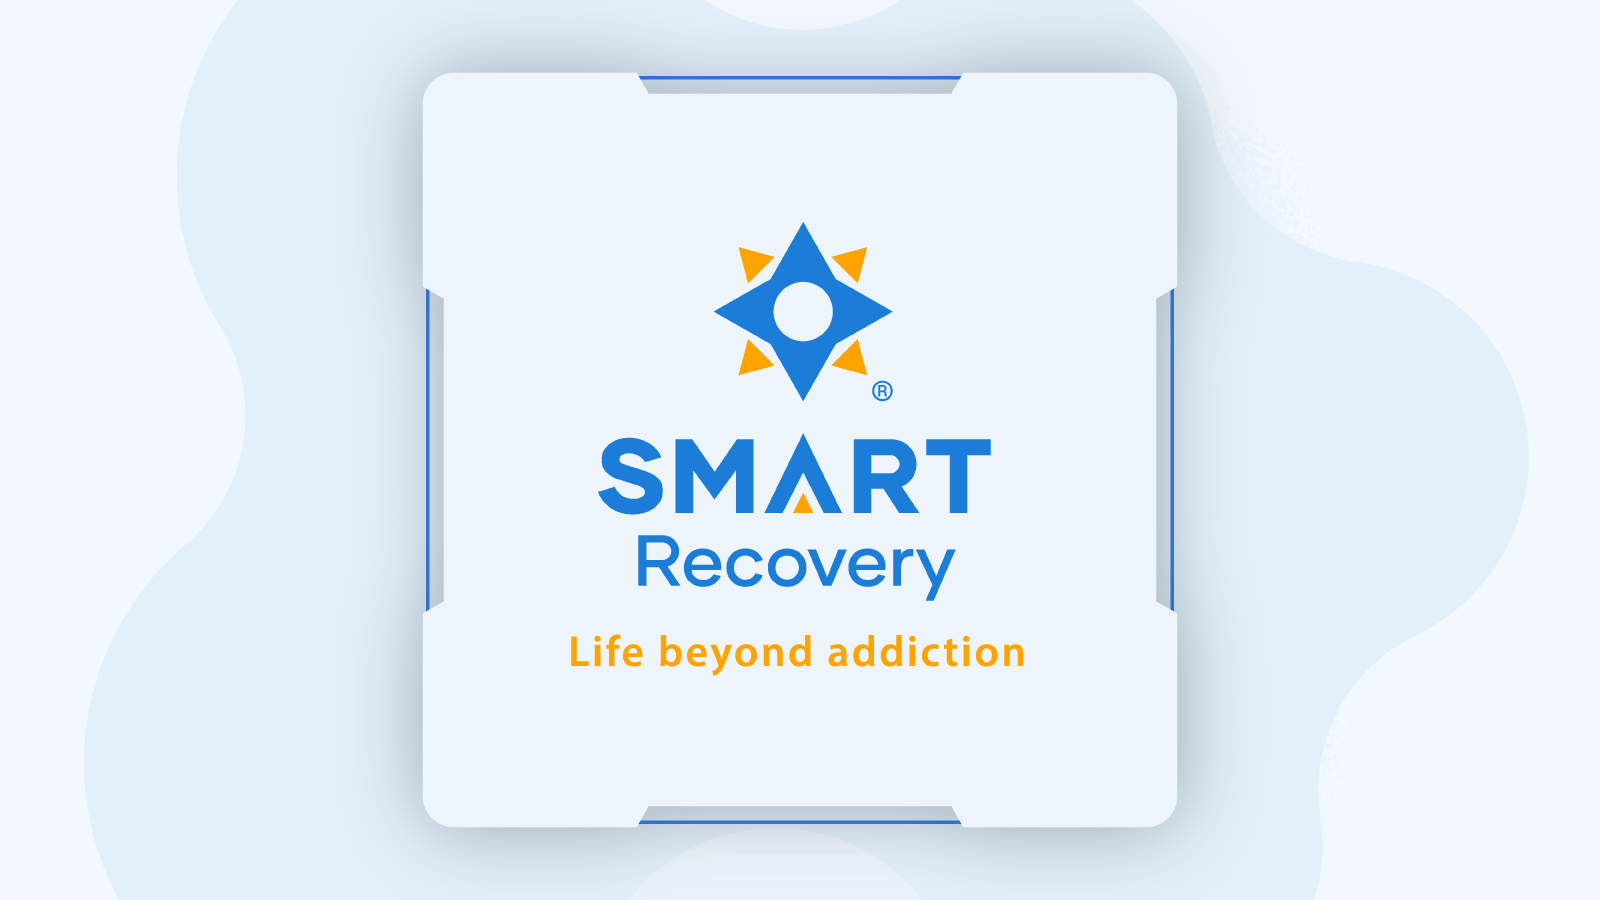 Smart Recovery – Life beyond addiction